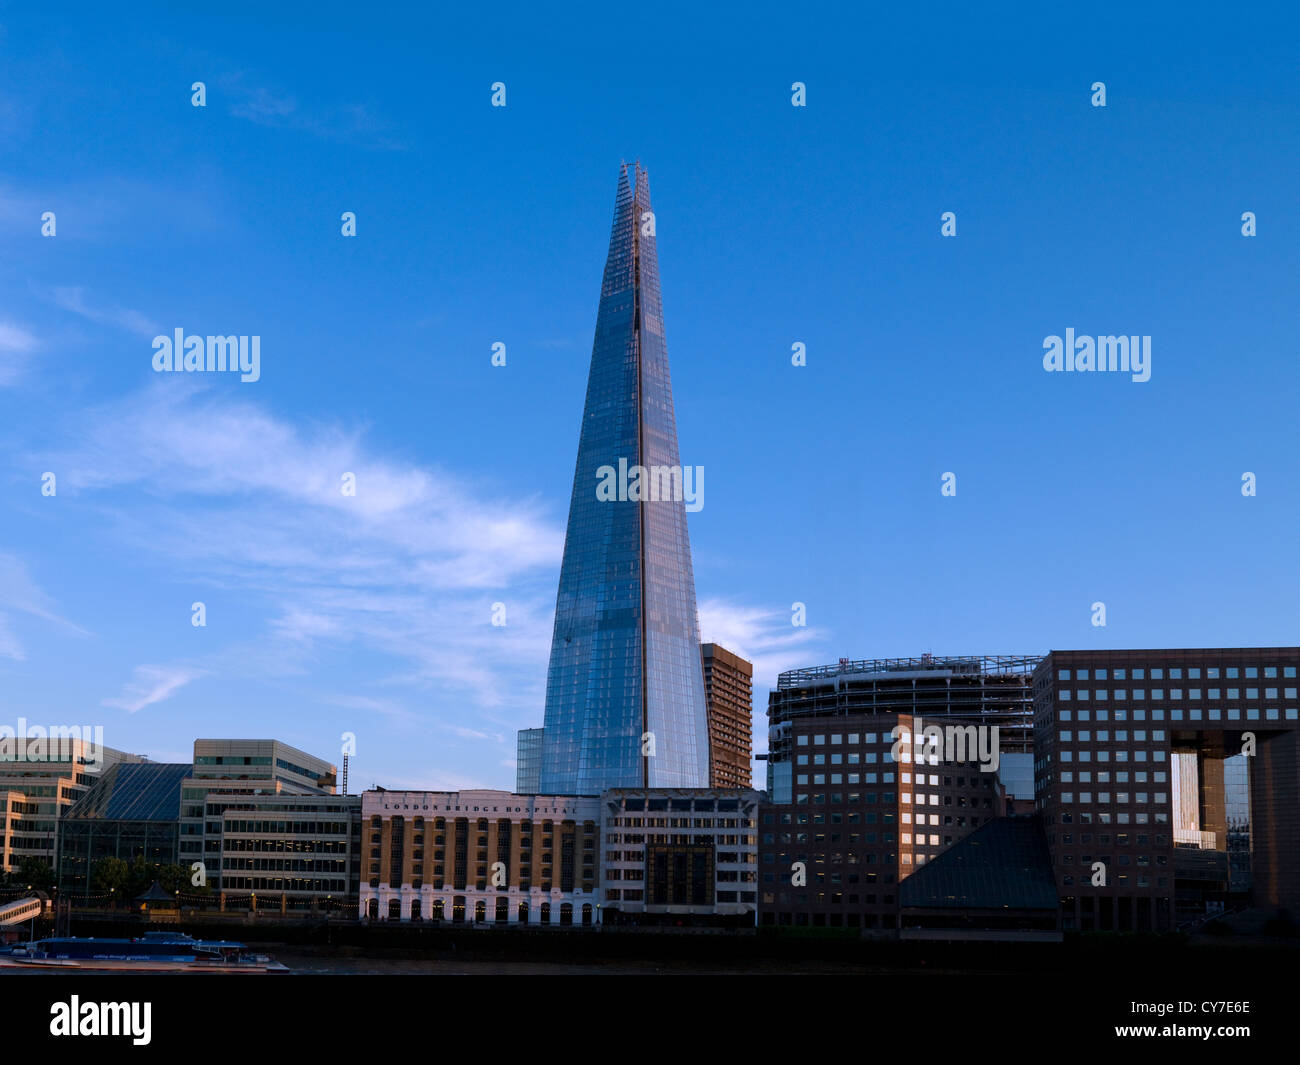 The Shard tallest building in Europe, London England Stock Photo